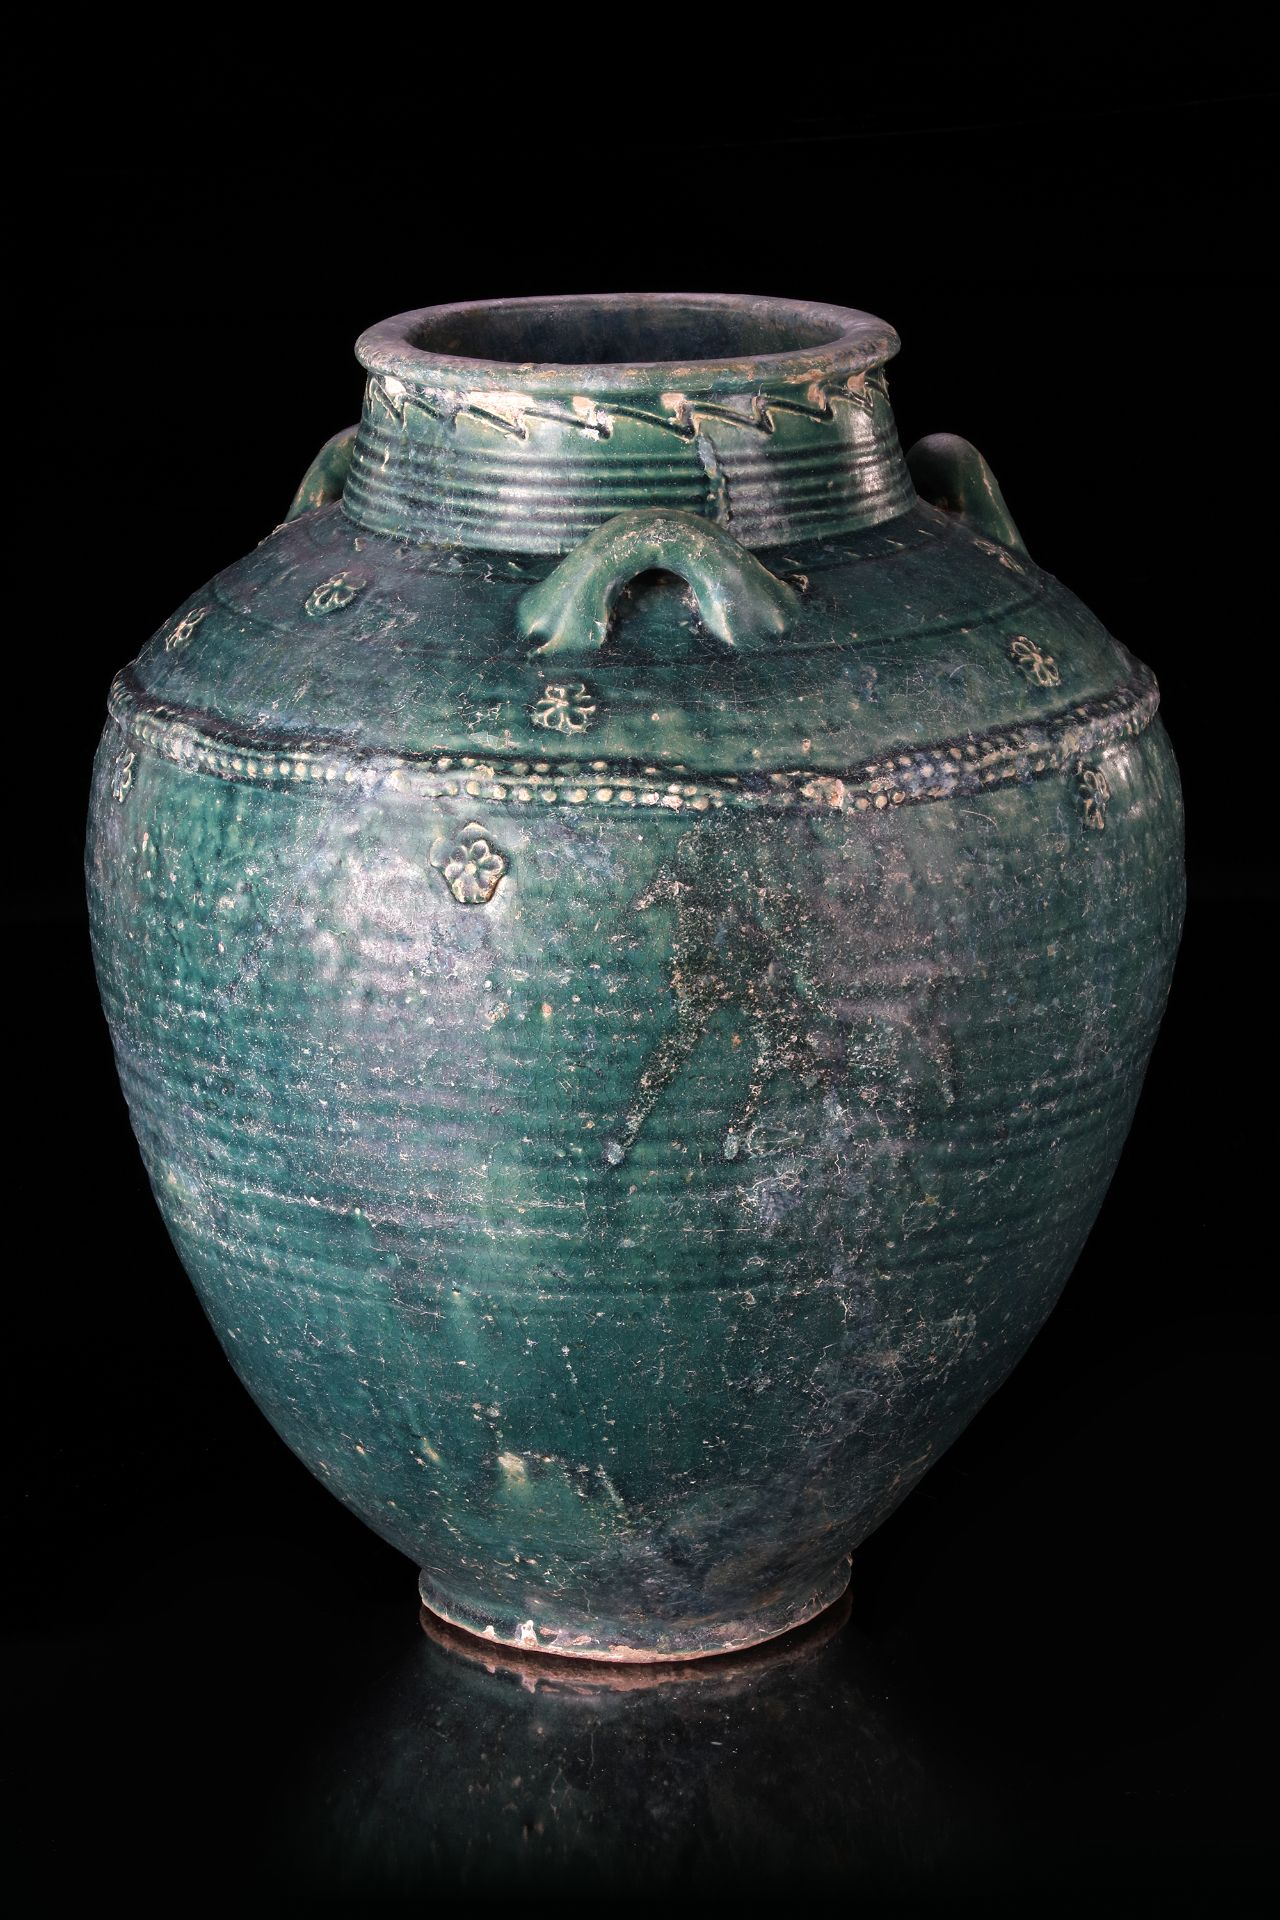 A LARGE POST SASSANIAN TURQUOISE GLAZED POTTERY STORAGE JAR, PERSIA, 6TH-8TH CENTURY - Image 4 of 6